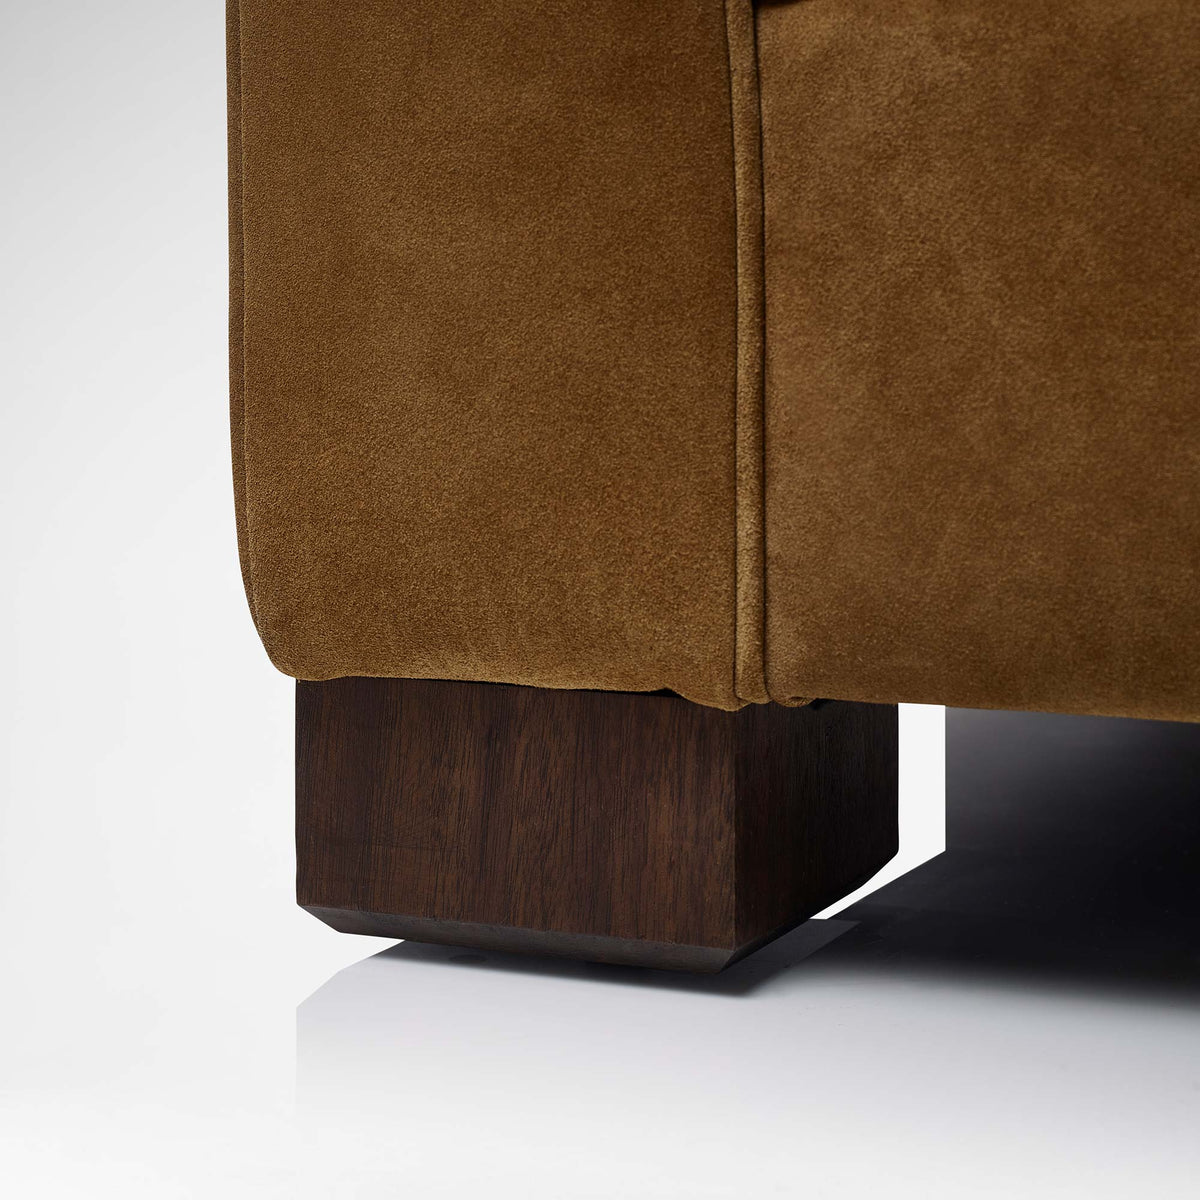 Chase Chair | Bespoke Design & Luxury Furniture | LINLEY